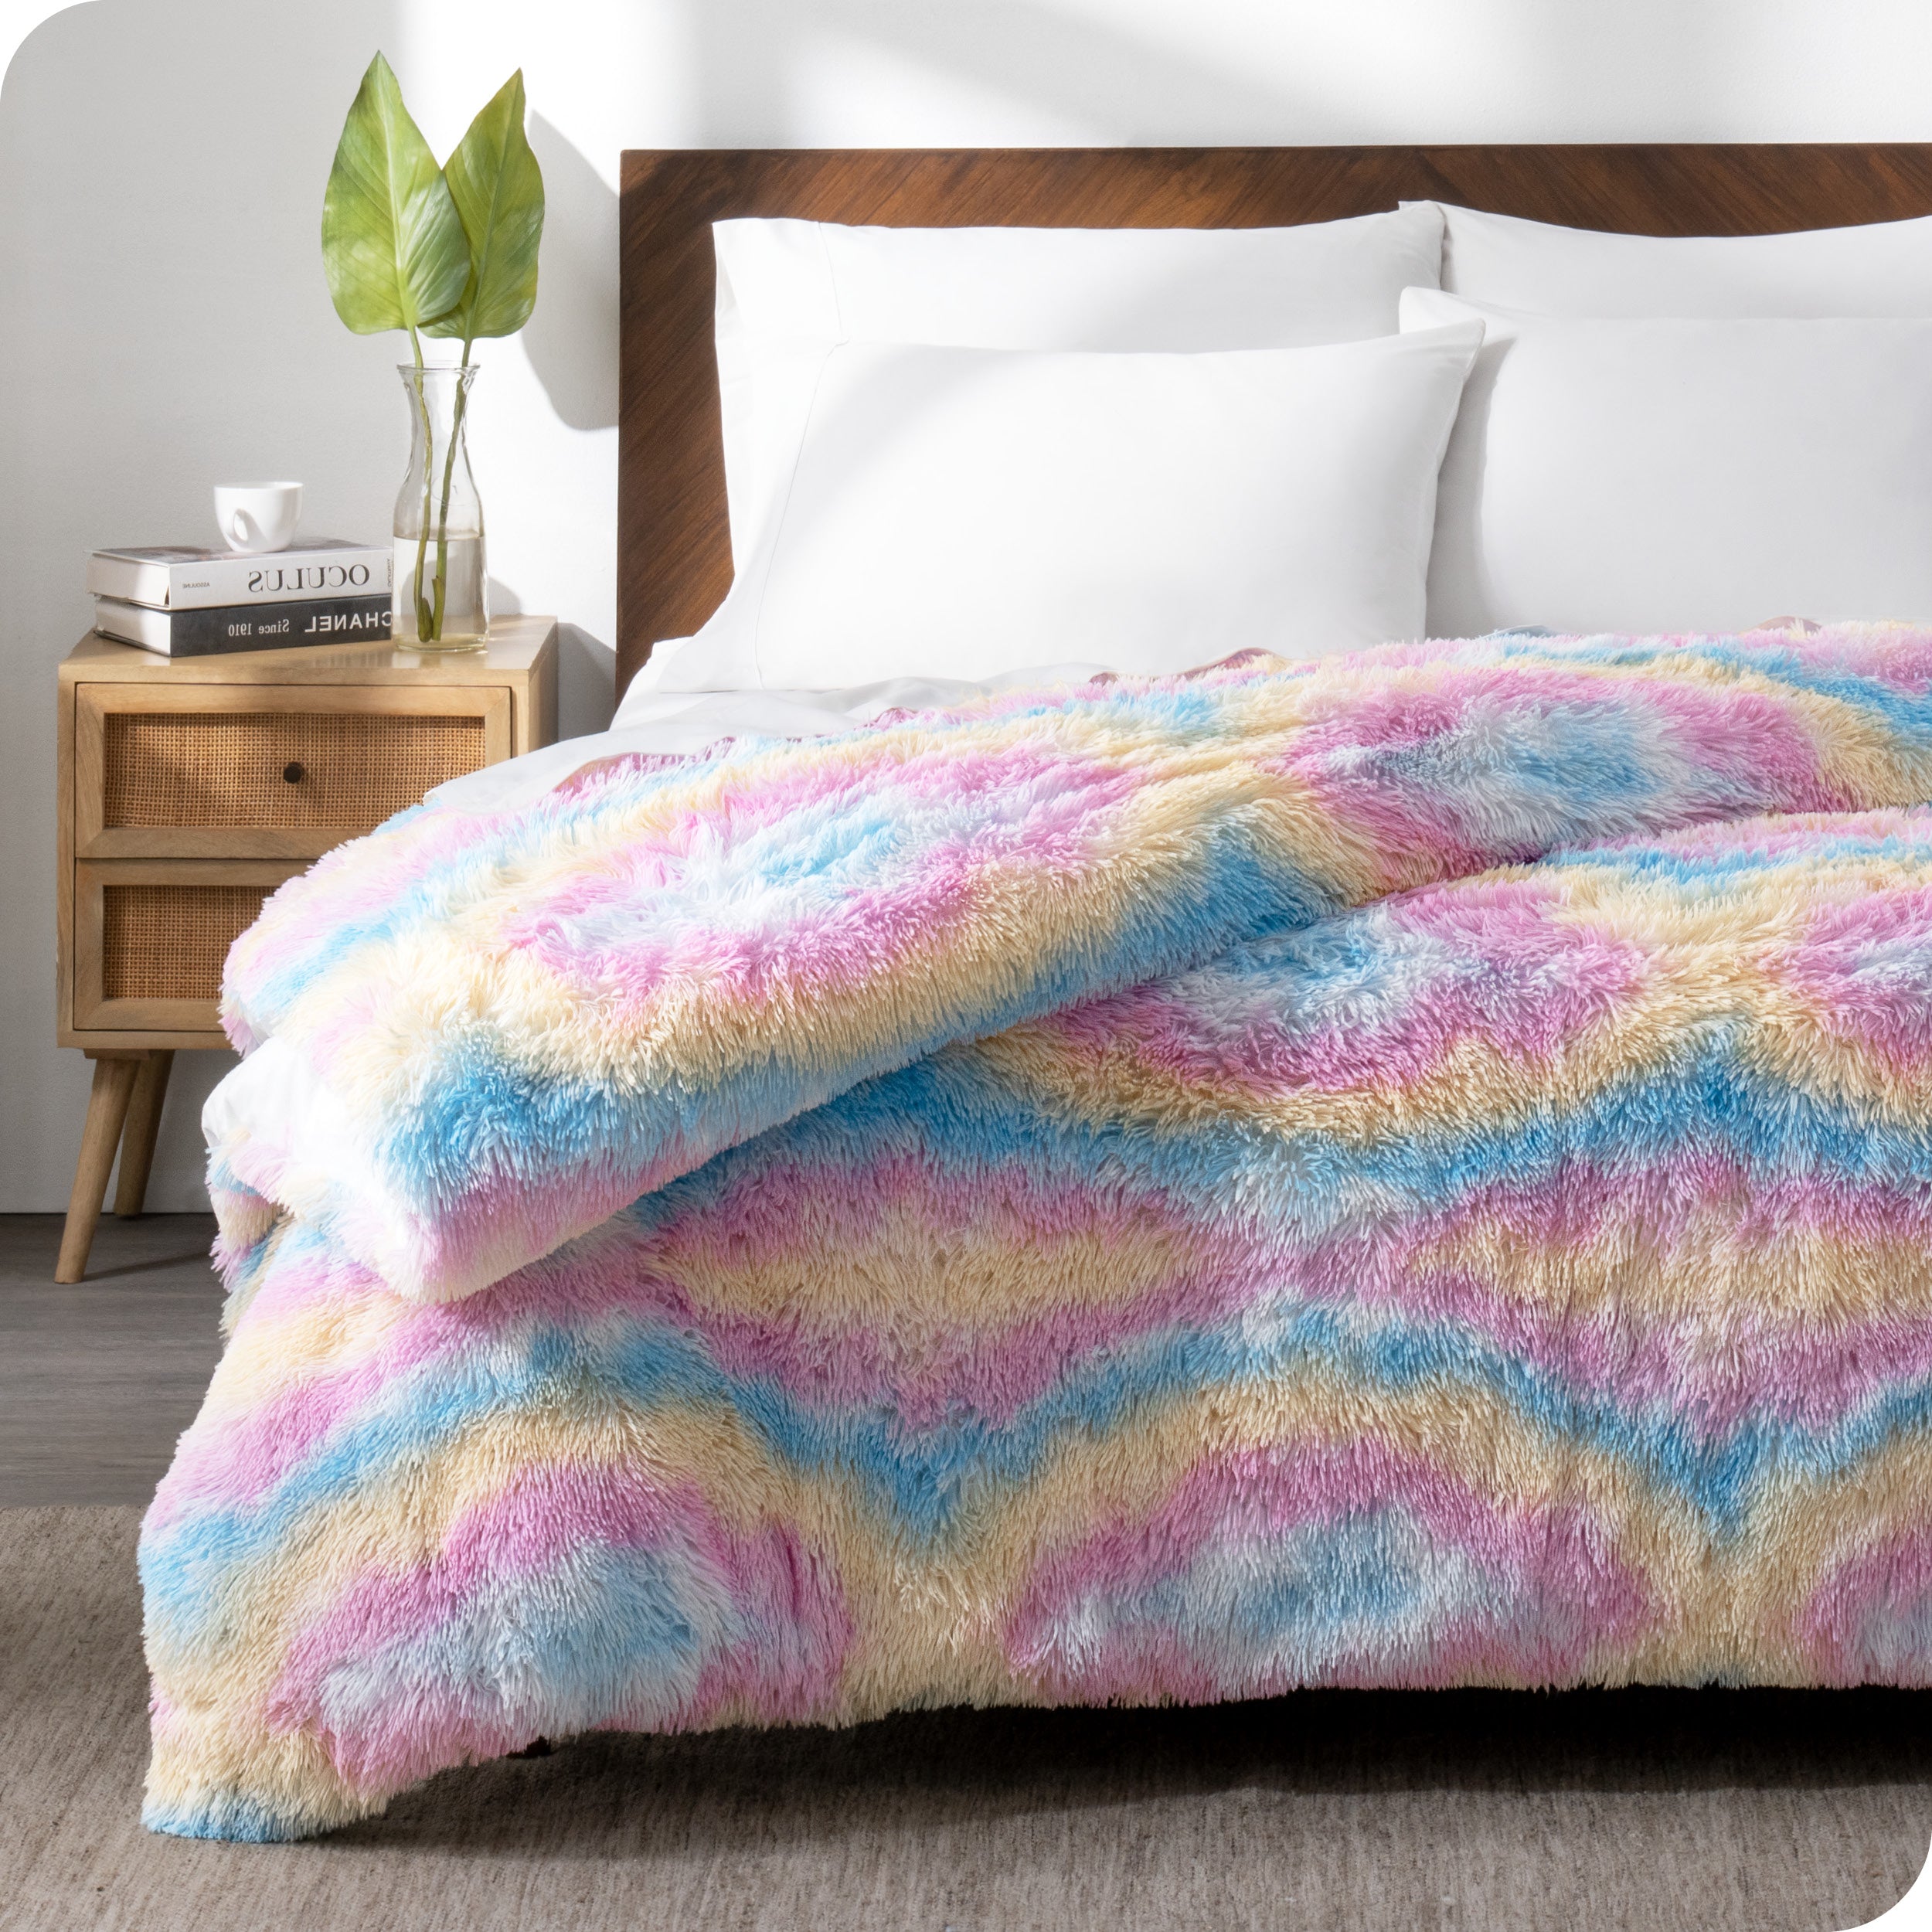 A tie-dye shaggy duvet cover on a bed with white sheets and pillowcases. A large plant is next to the bed.